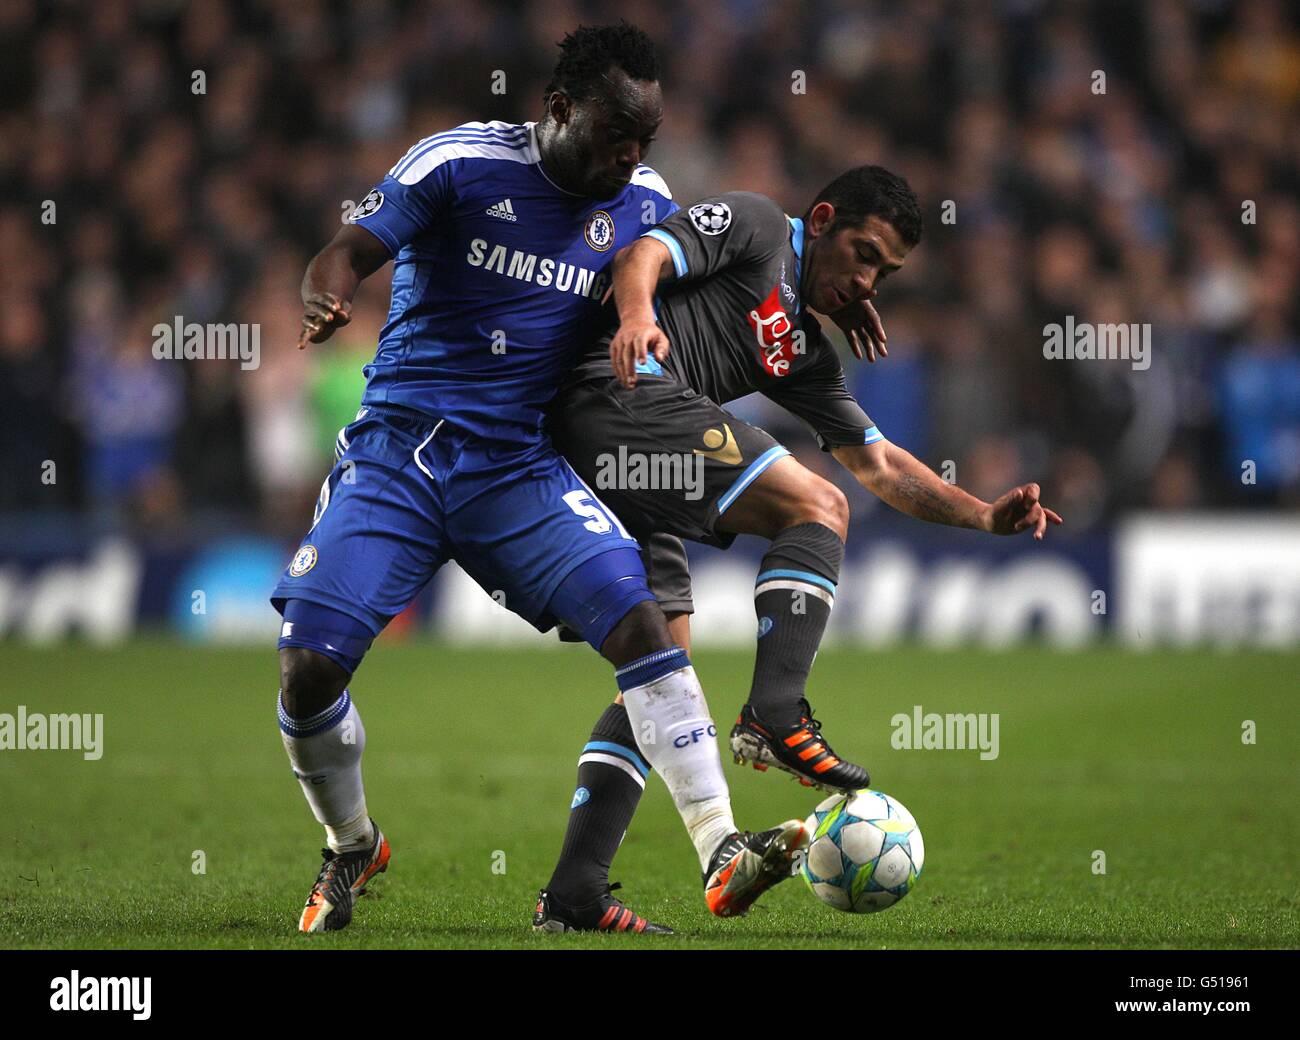 Napoli's Walter Gargano (right) and Chelsea's Michael Essien battle for the ball Stock Photo